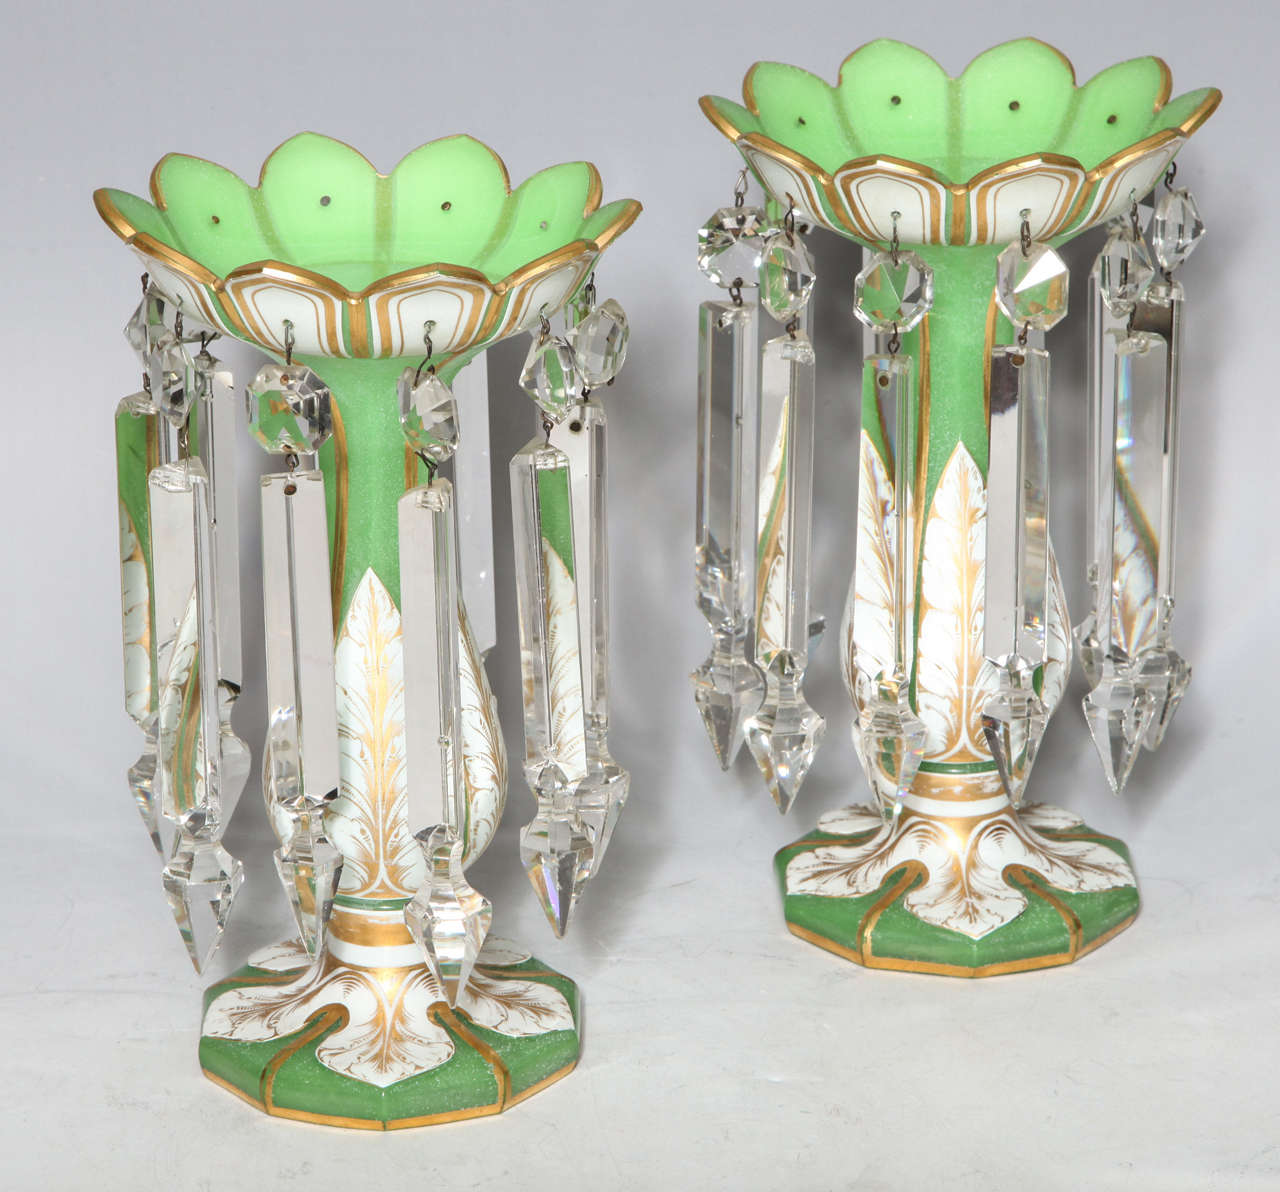 A very fine and quite unusual pair of Antique French double overlay, white over apple green opaline glass cut and faceted Lusters, each further adorned by hand diamond cut crystal prisms. Can be used as candlesticks or flower vases. Small minor